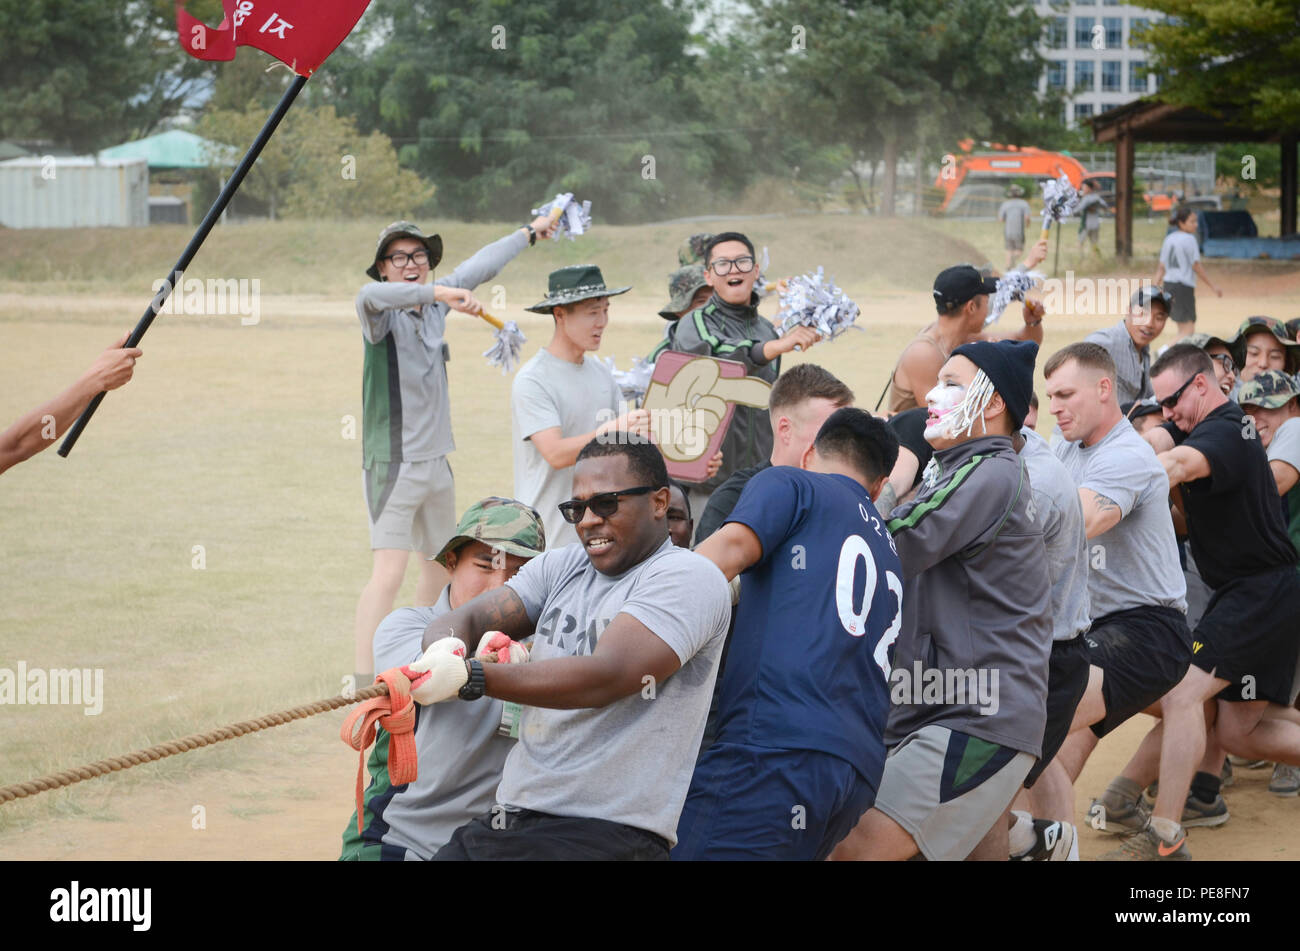 Republic of Korea Army and U.S. Army Soldiers strain at the rope during a game of tug-of-war held during a sports competition and cultural exchange hosted by the ROK Army’s 1-58th Engineer Battalion at a ROK Army base near Bucheon, South Korea, to build friendship between the allied forces, Sept. 30, 2015. (U.S. Army photo by Staff Sgt. John Healy, 2ABCT PAO, 1st Cavalry Division) Stock Photo